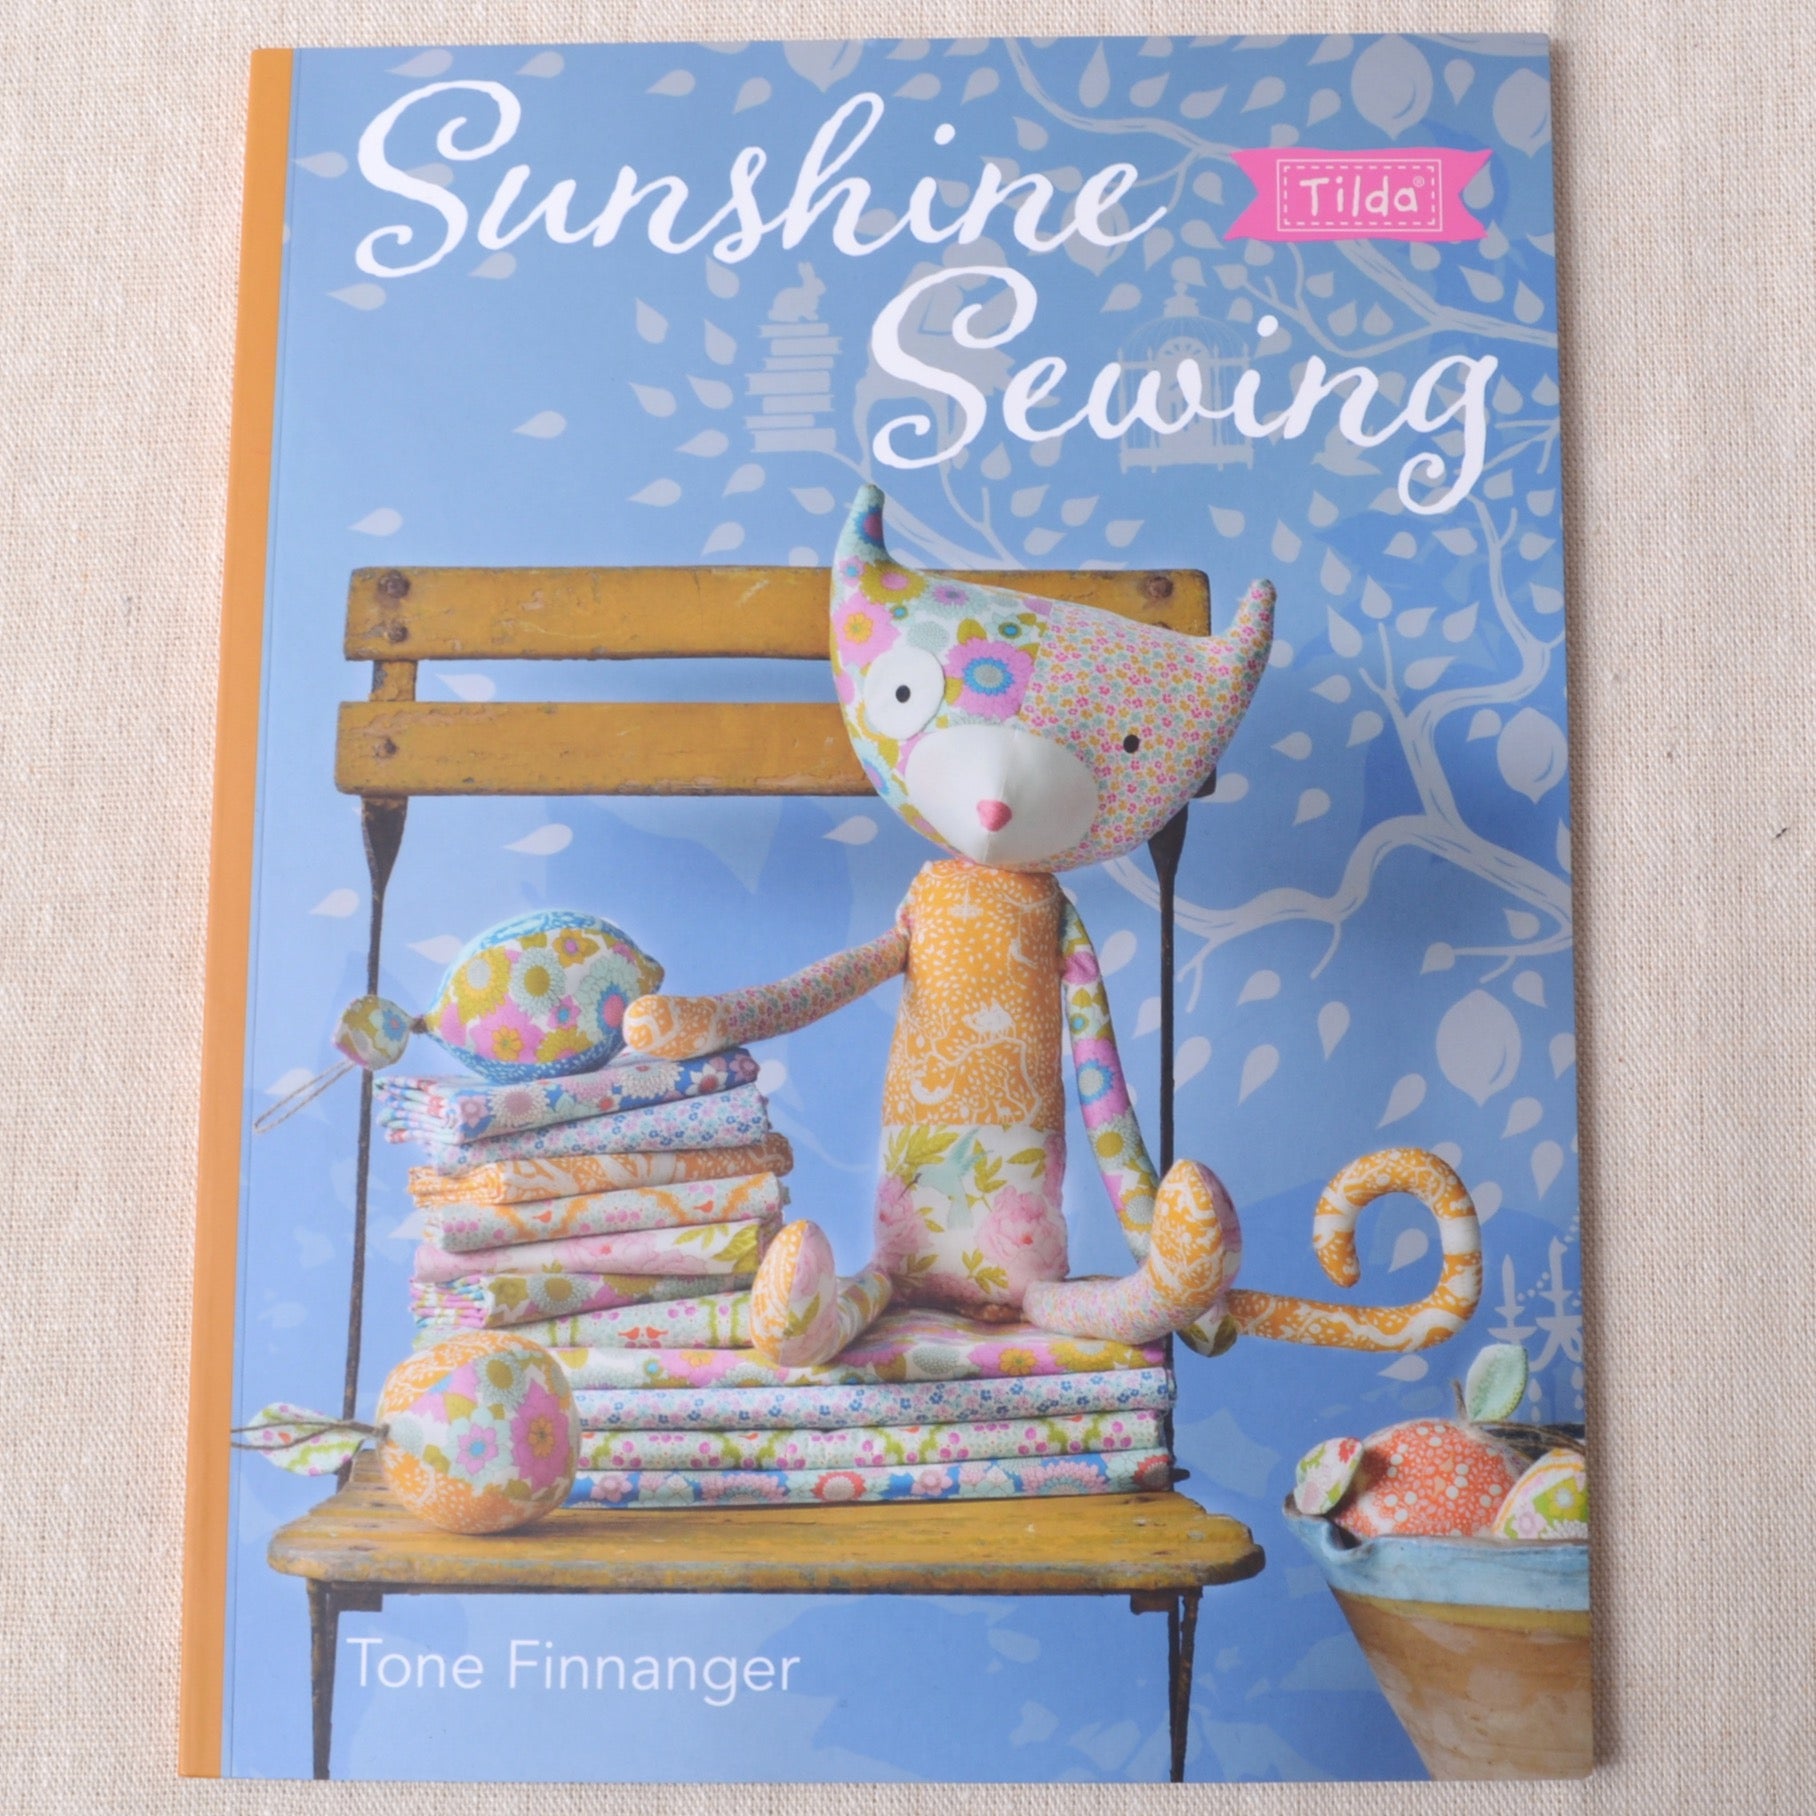 Sunshine Sewing by Tone Finnanger - A Threaded Needle